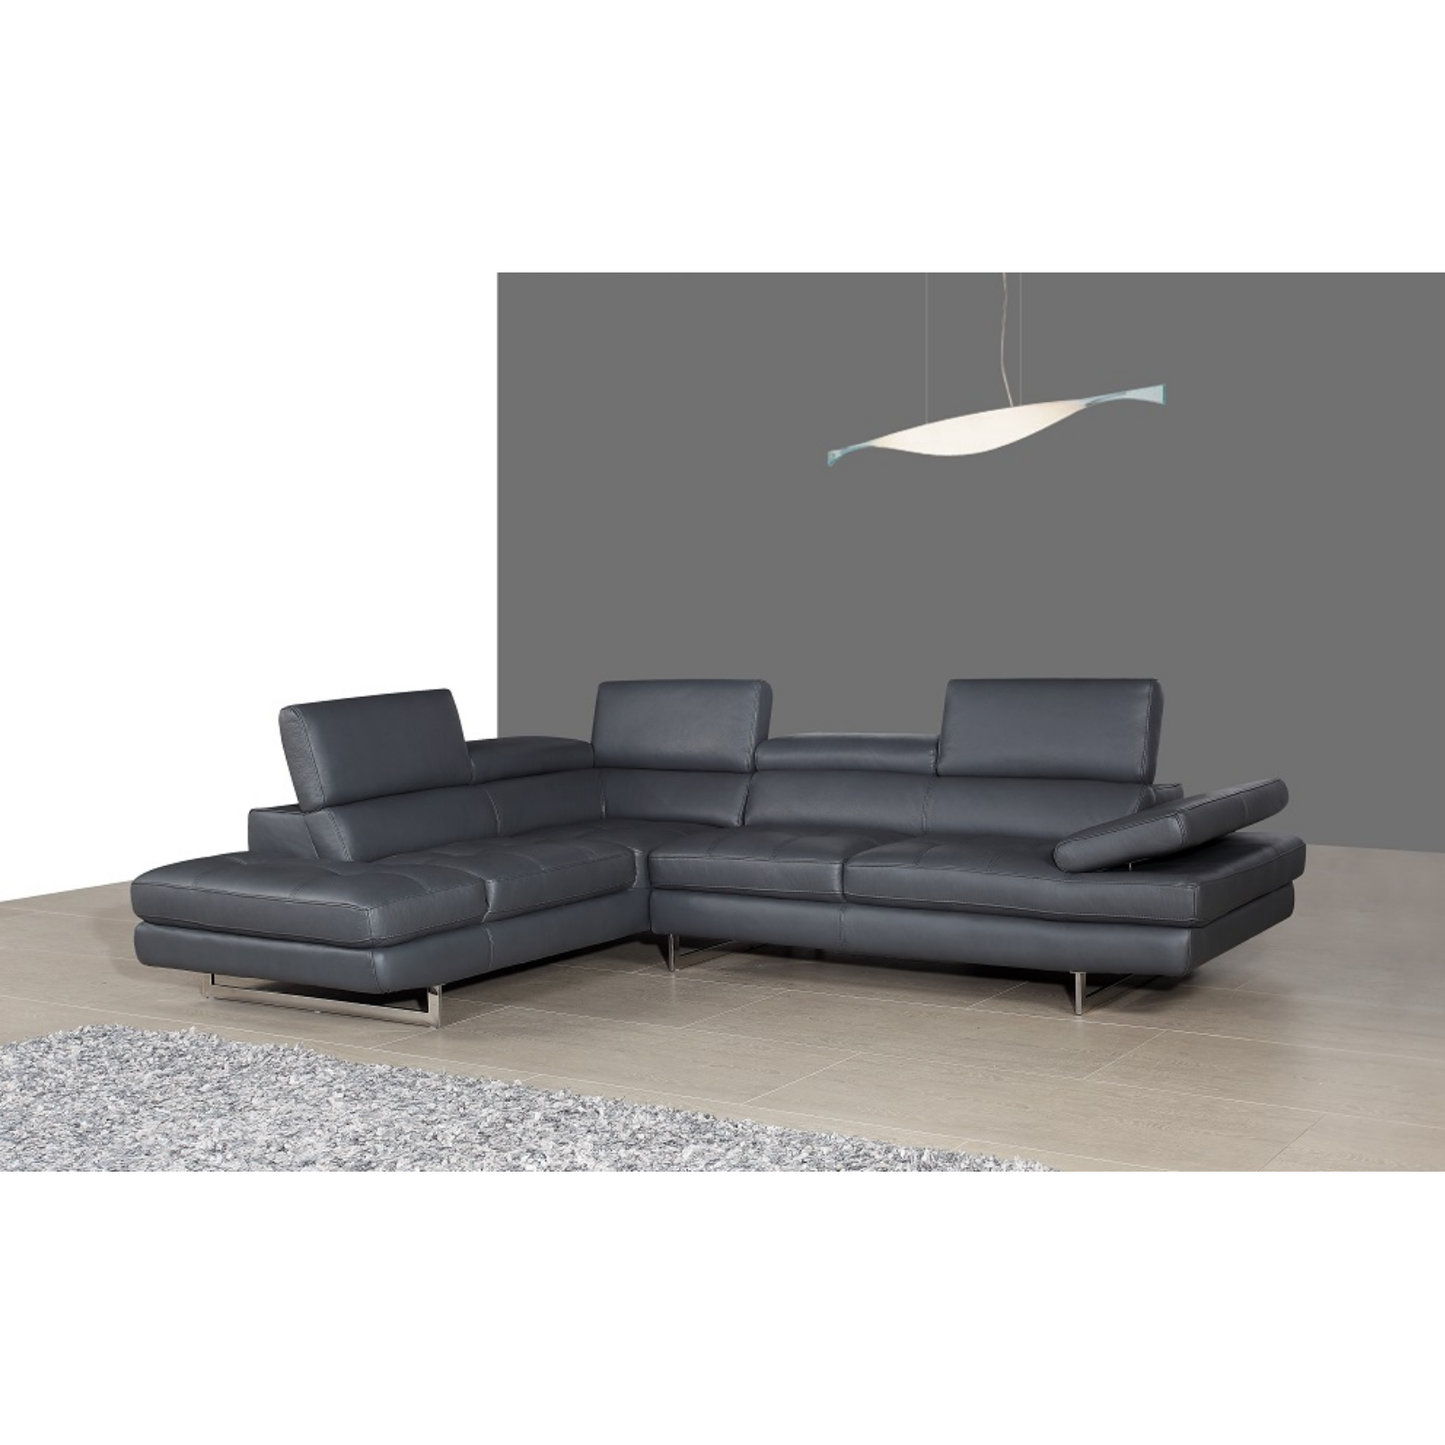 A761 Italian Leather Sectional Slate Grey In Left Hand Facing jnmfurniture Sectionals 178552-LHFC